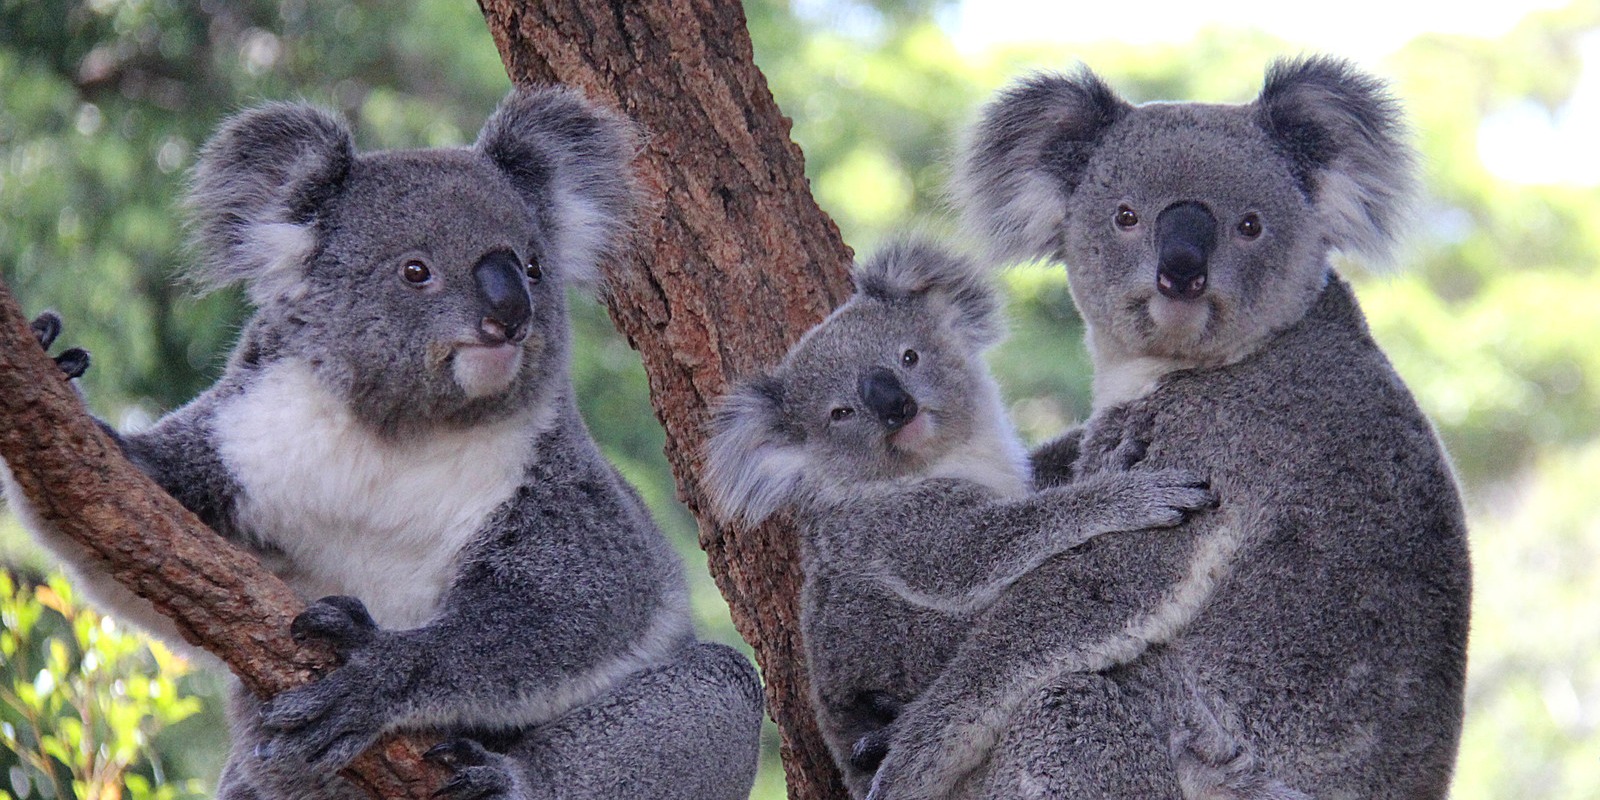 A close-up view of a family of koalas sitting in a tree in a zoo enclosure.